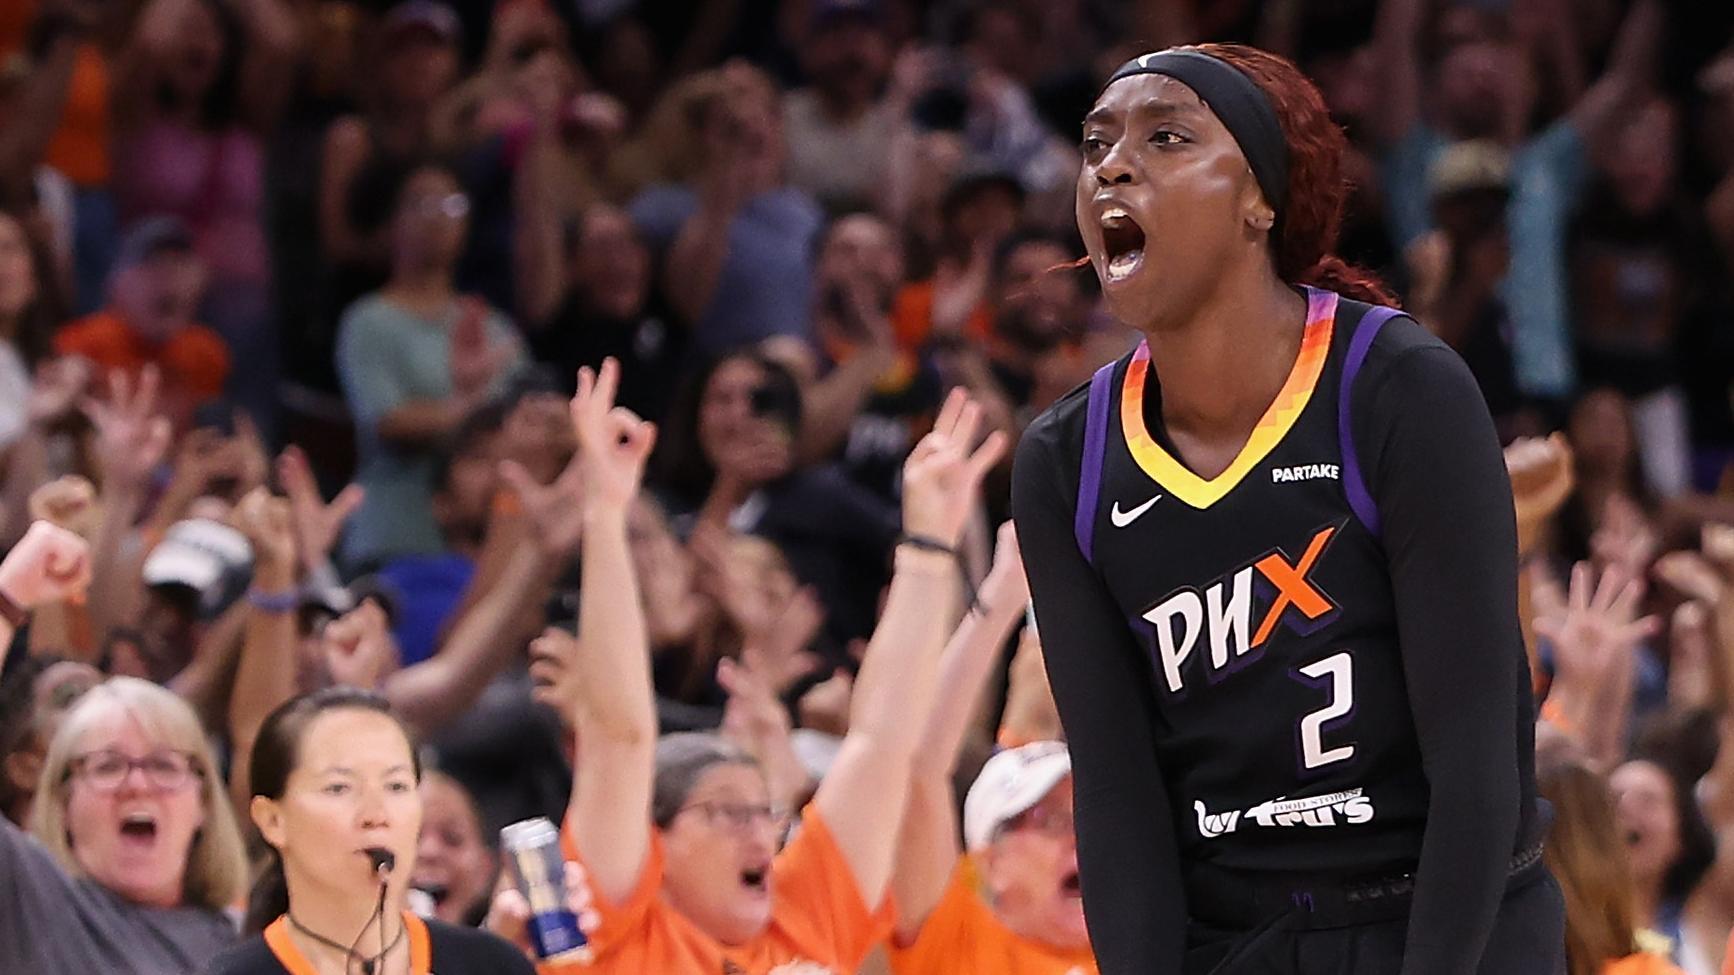 Kahleah Copper calls game with last-second triple for Mercury